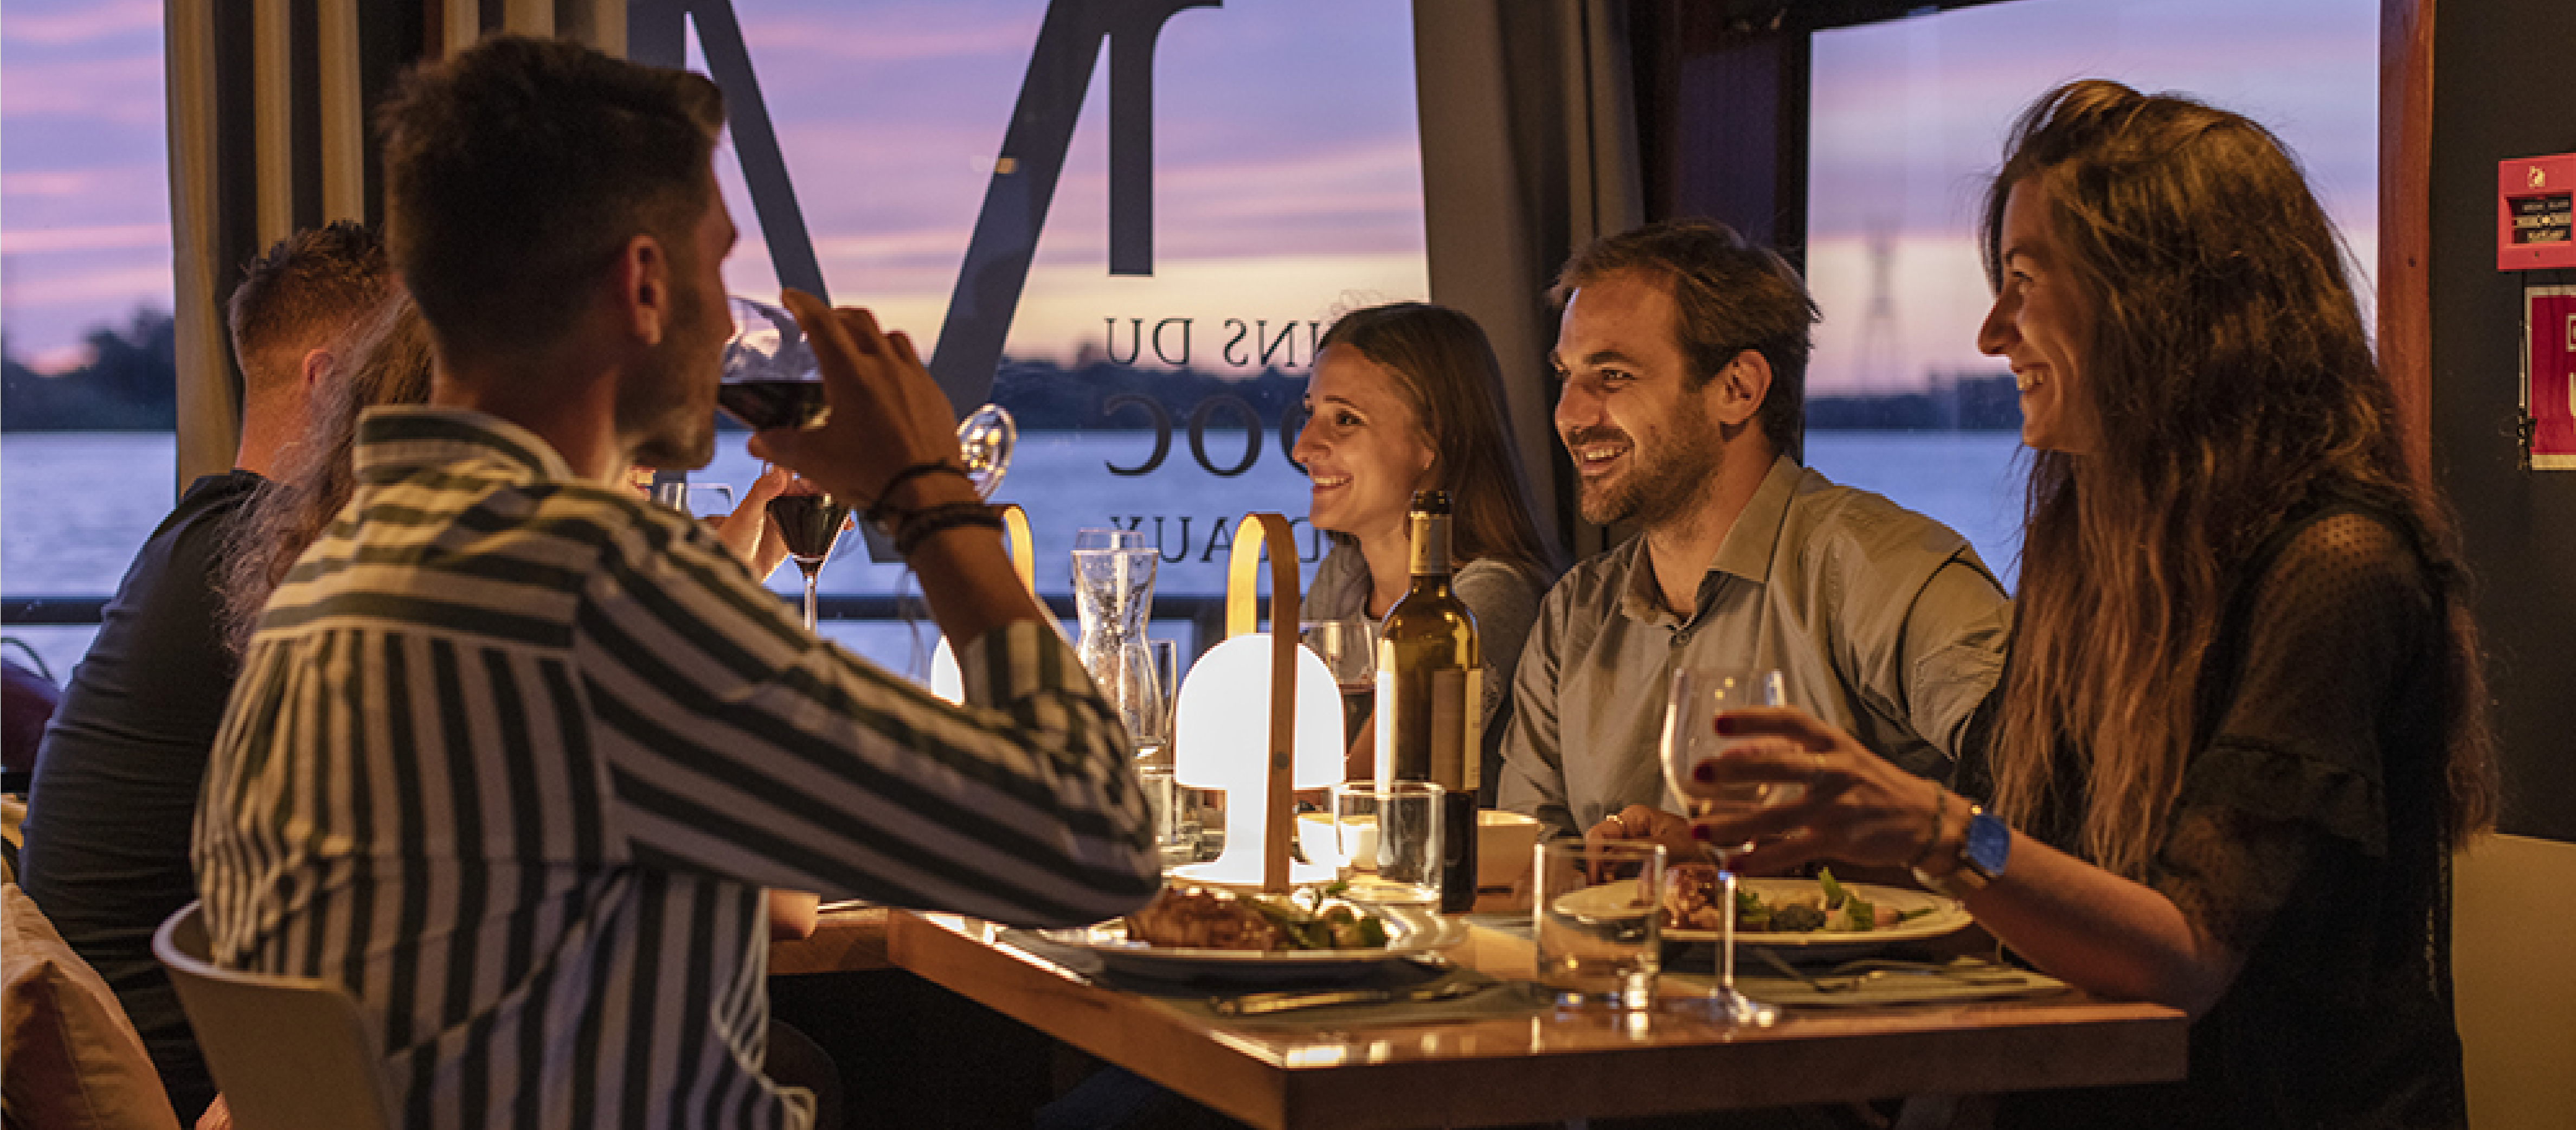 Take a seat on board for a dinner cruise!